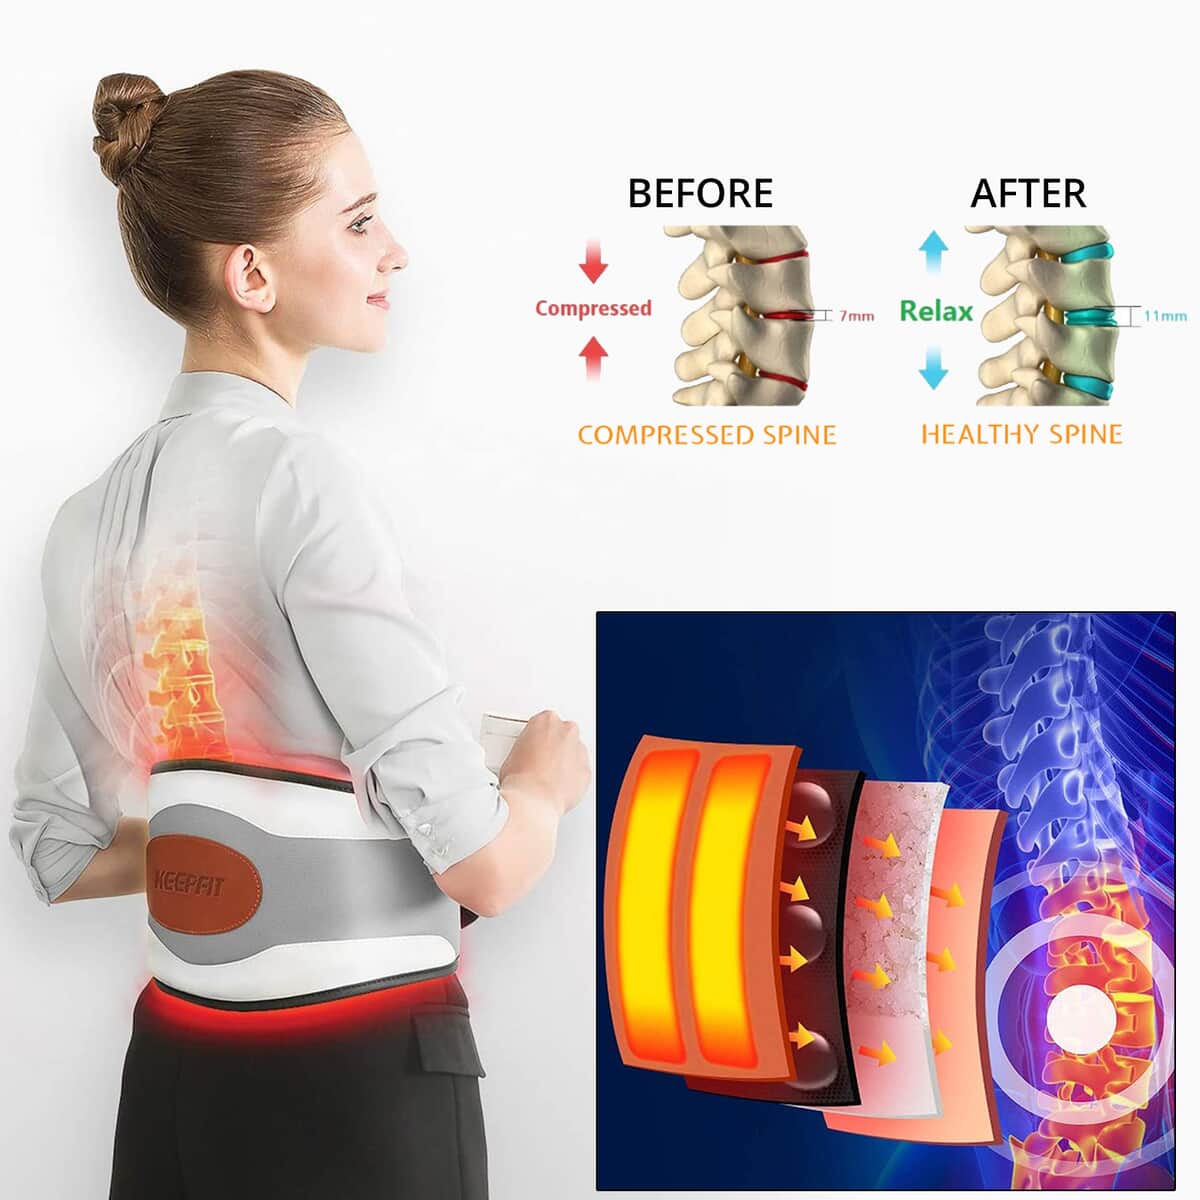 Best Beauty Finds 8 IN 1 Heat Compression Cordless Magnet Therapy Pain Relieving Belt image number 6